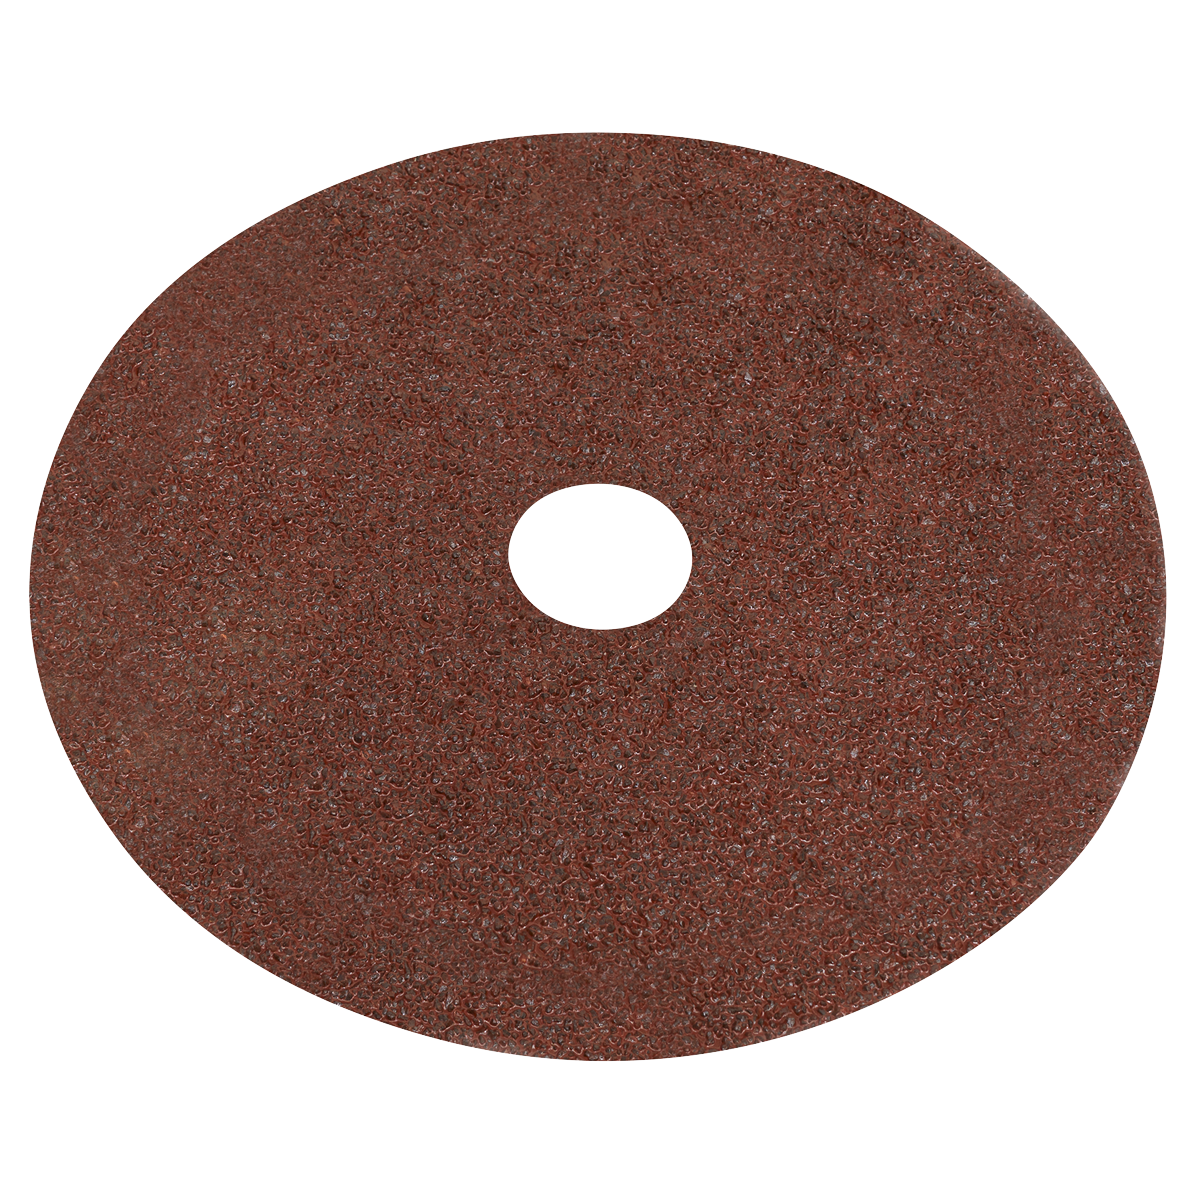 Fibre Backed Disc Ø115mm - 24Grit Pack of 25 - WSD4524 - Farming Parts